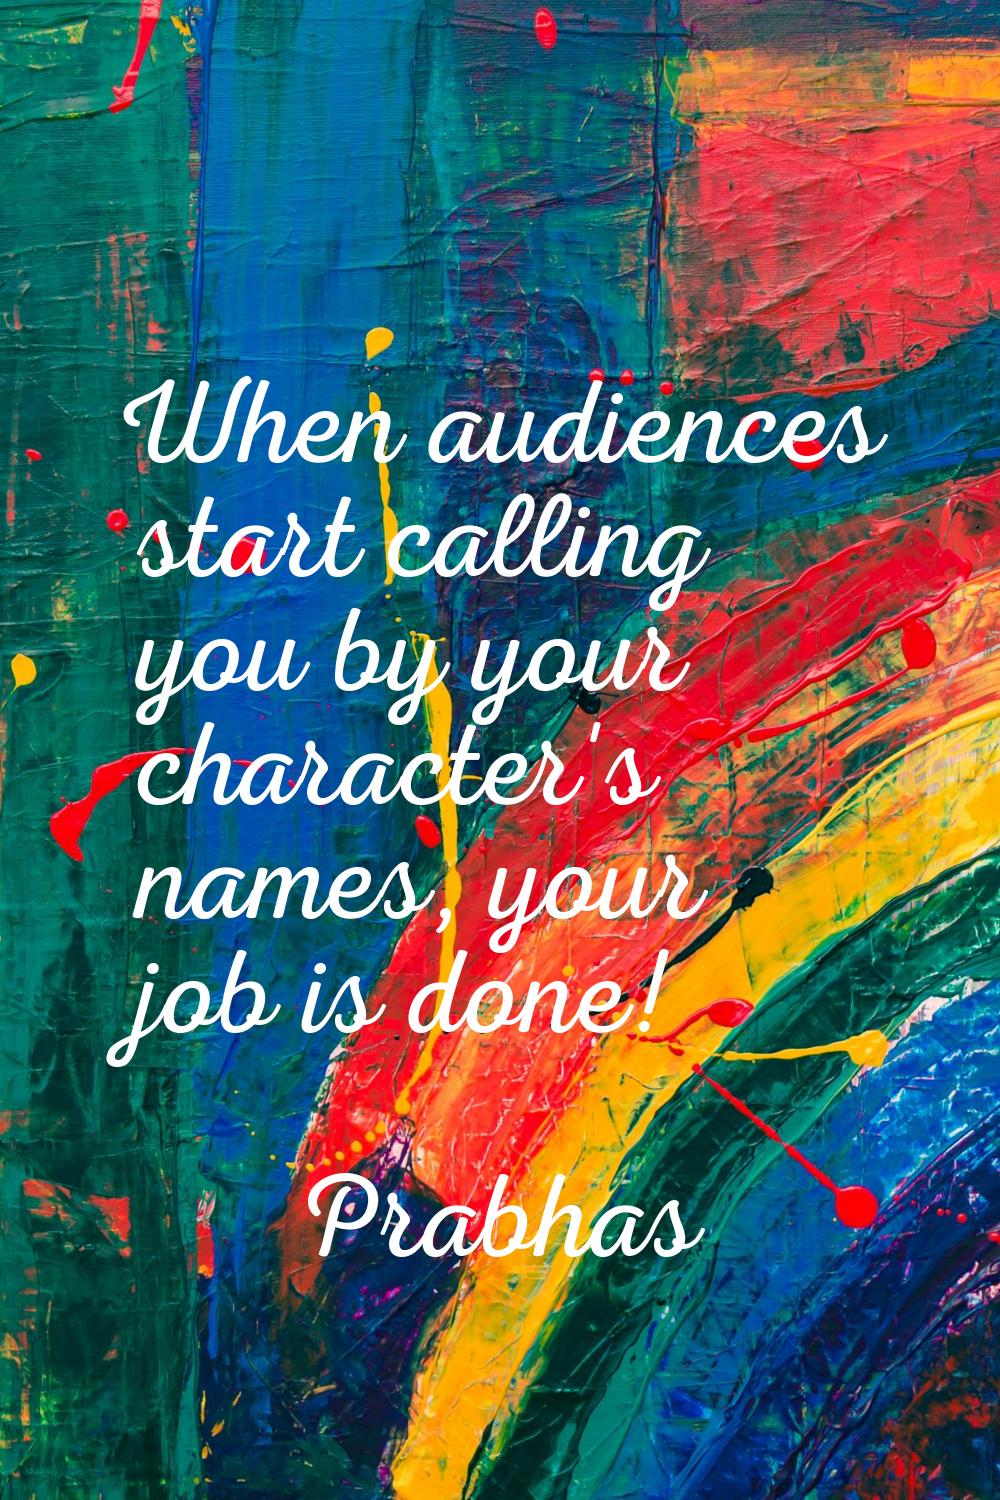 When audiences start calling you by your character's names, your job is done!